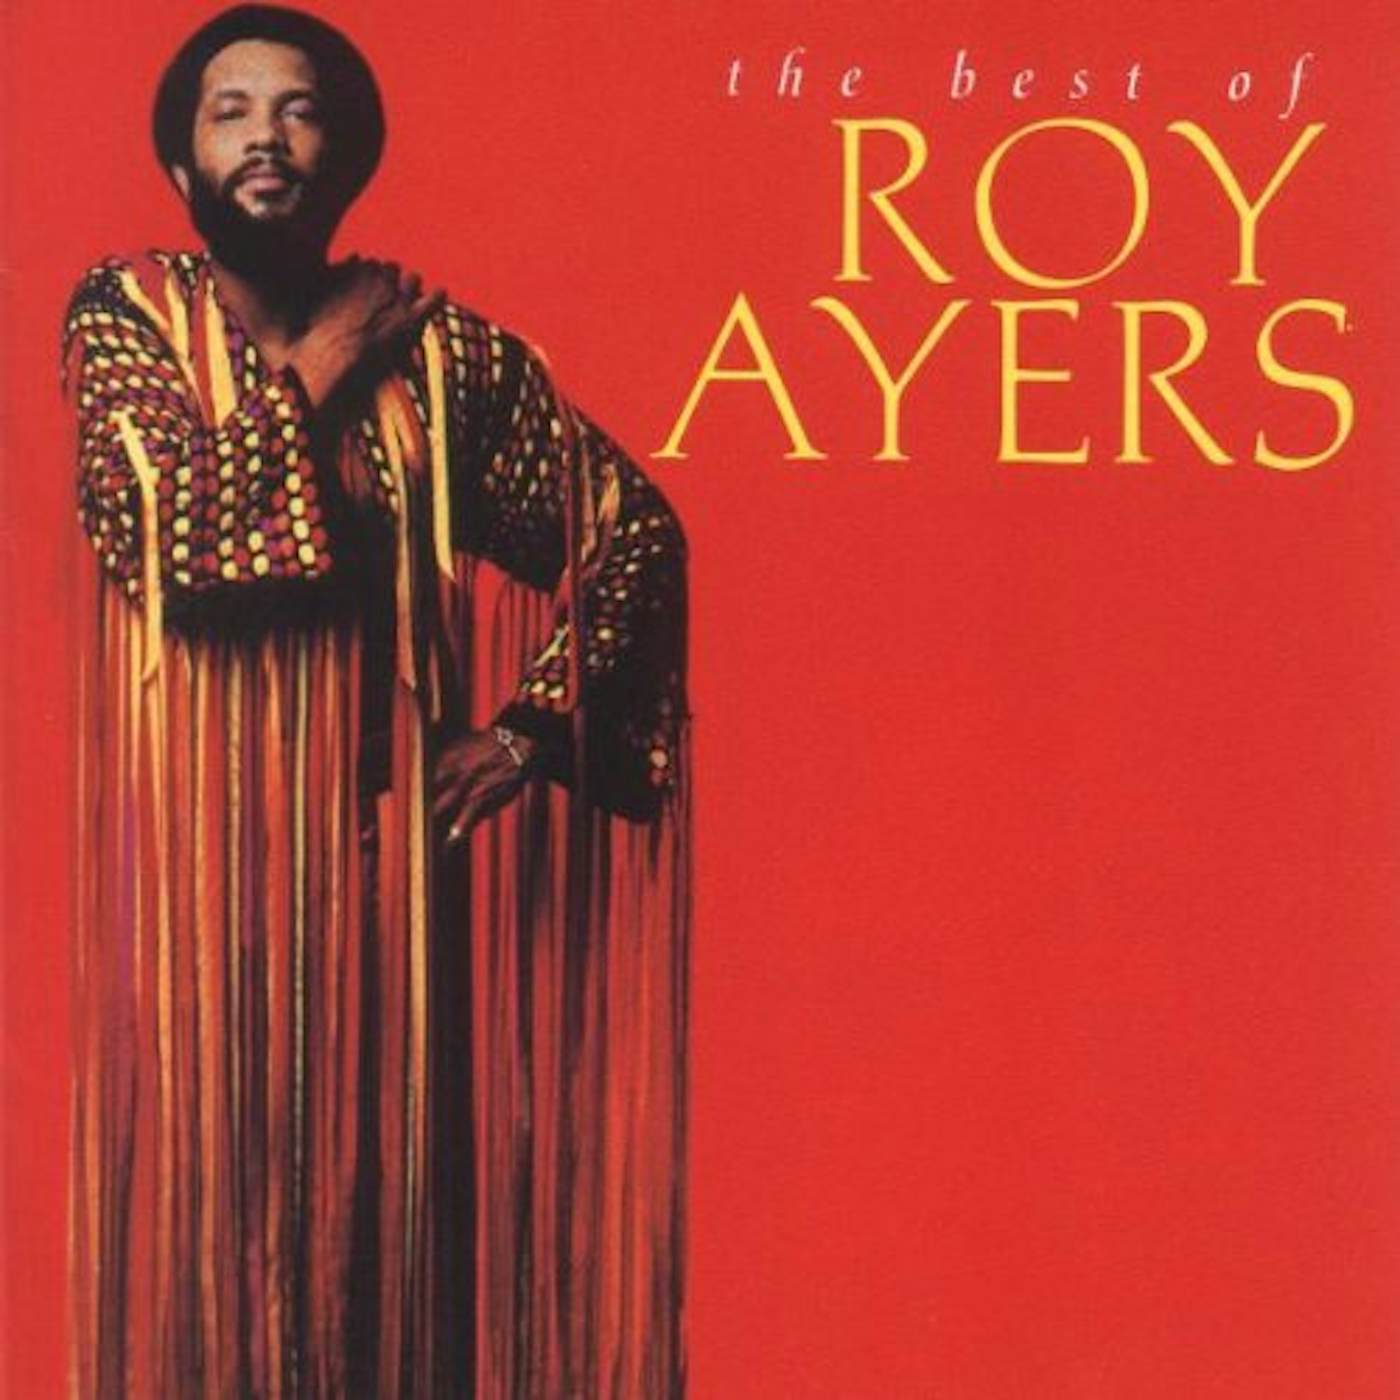 Roy Ayers BEST OF CD